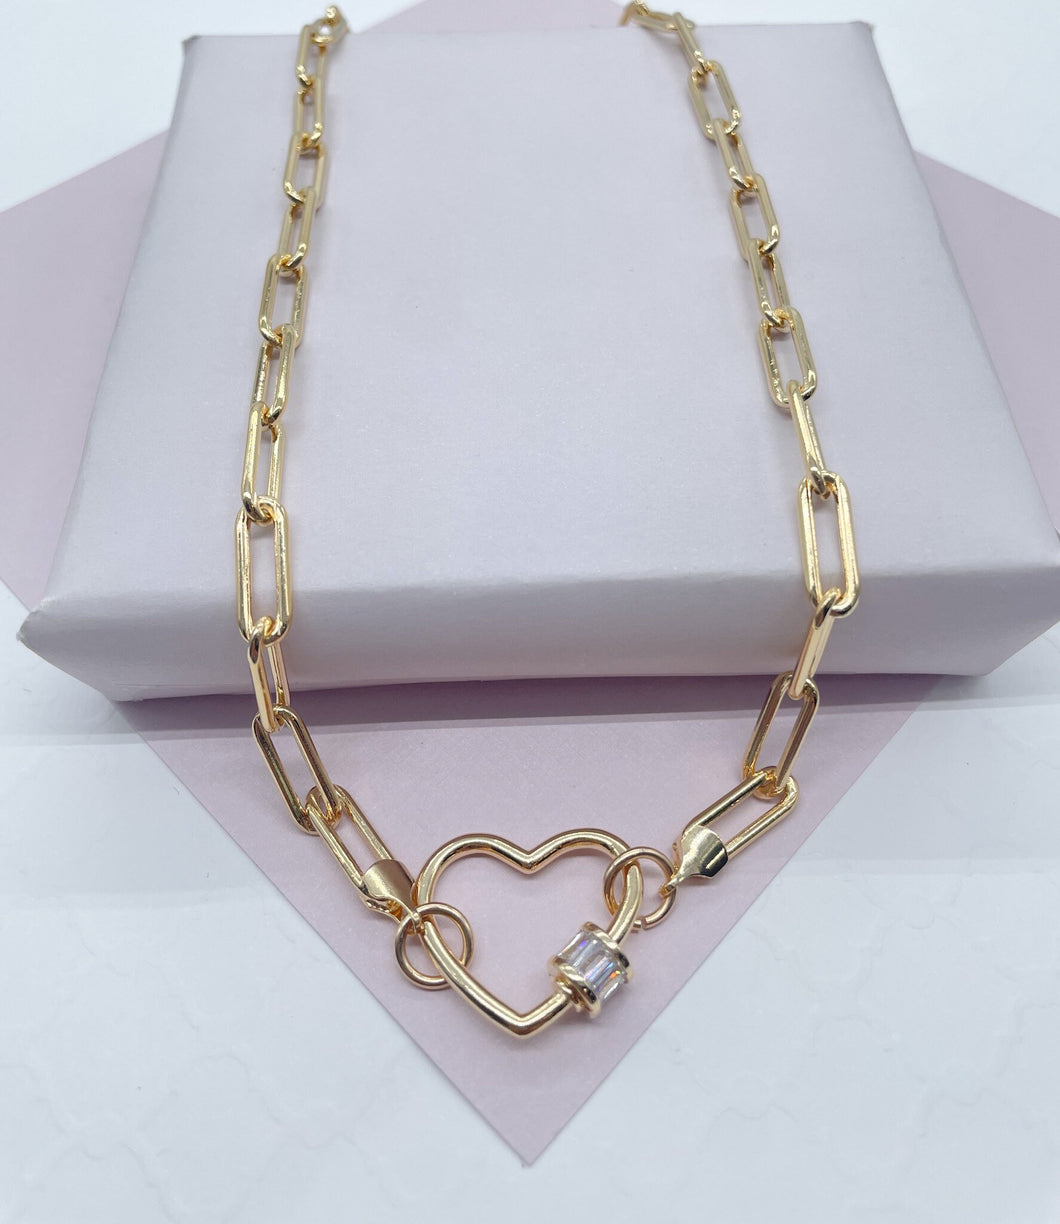 18k Gold Filled Paper Clip Choker with Heart Carabiner Lock Clasp Featuring Baguette CZ closure   and Supplies